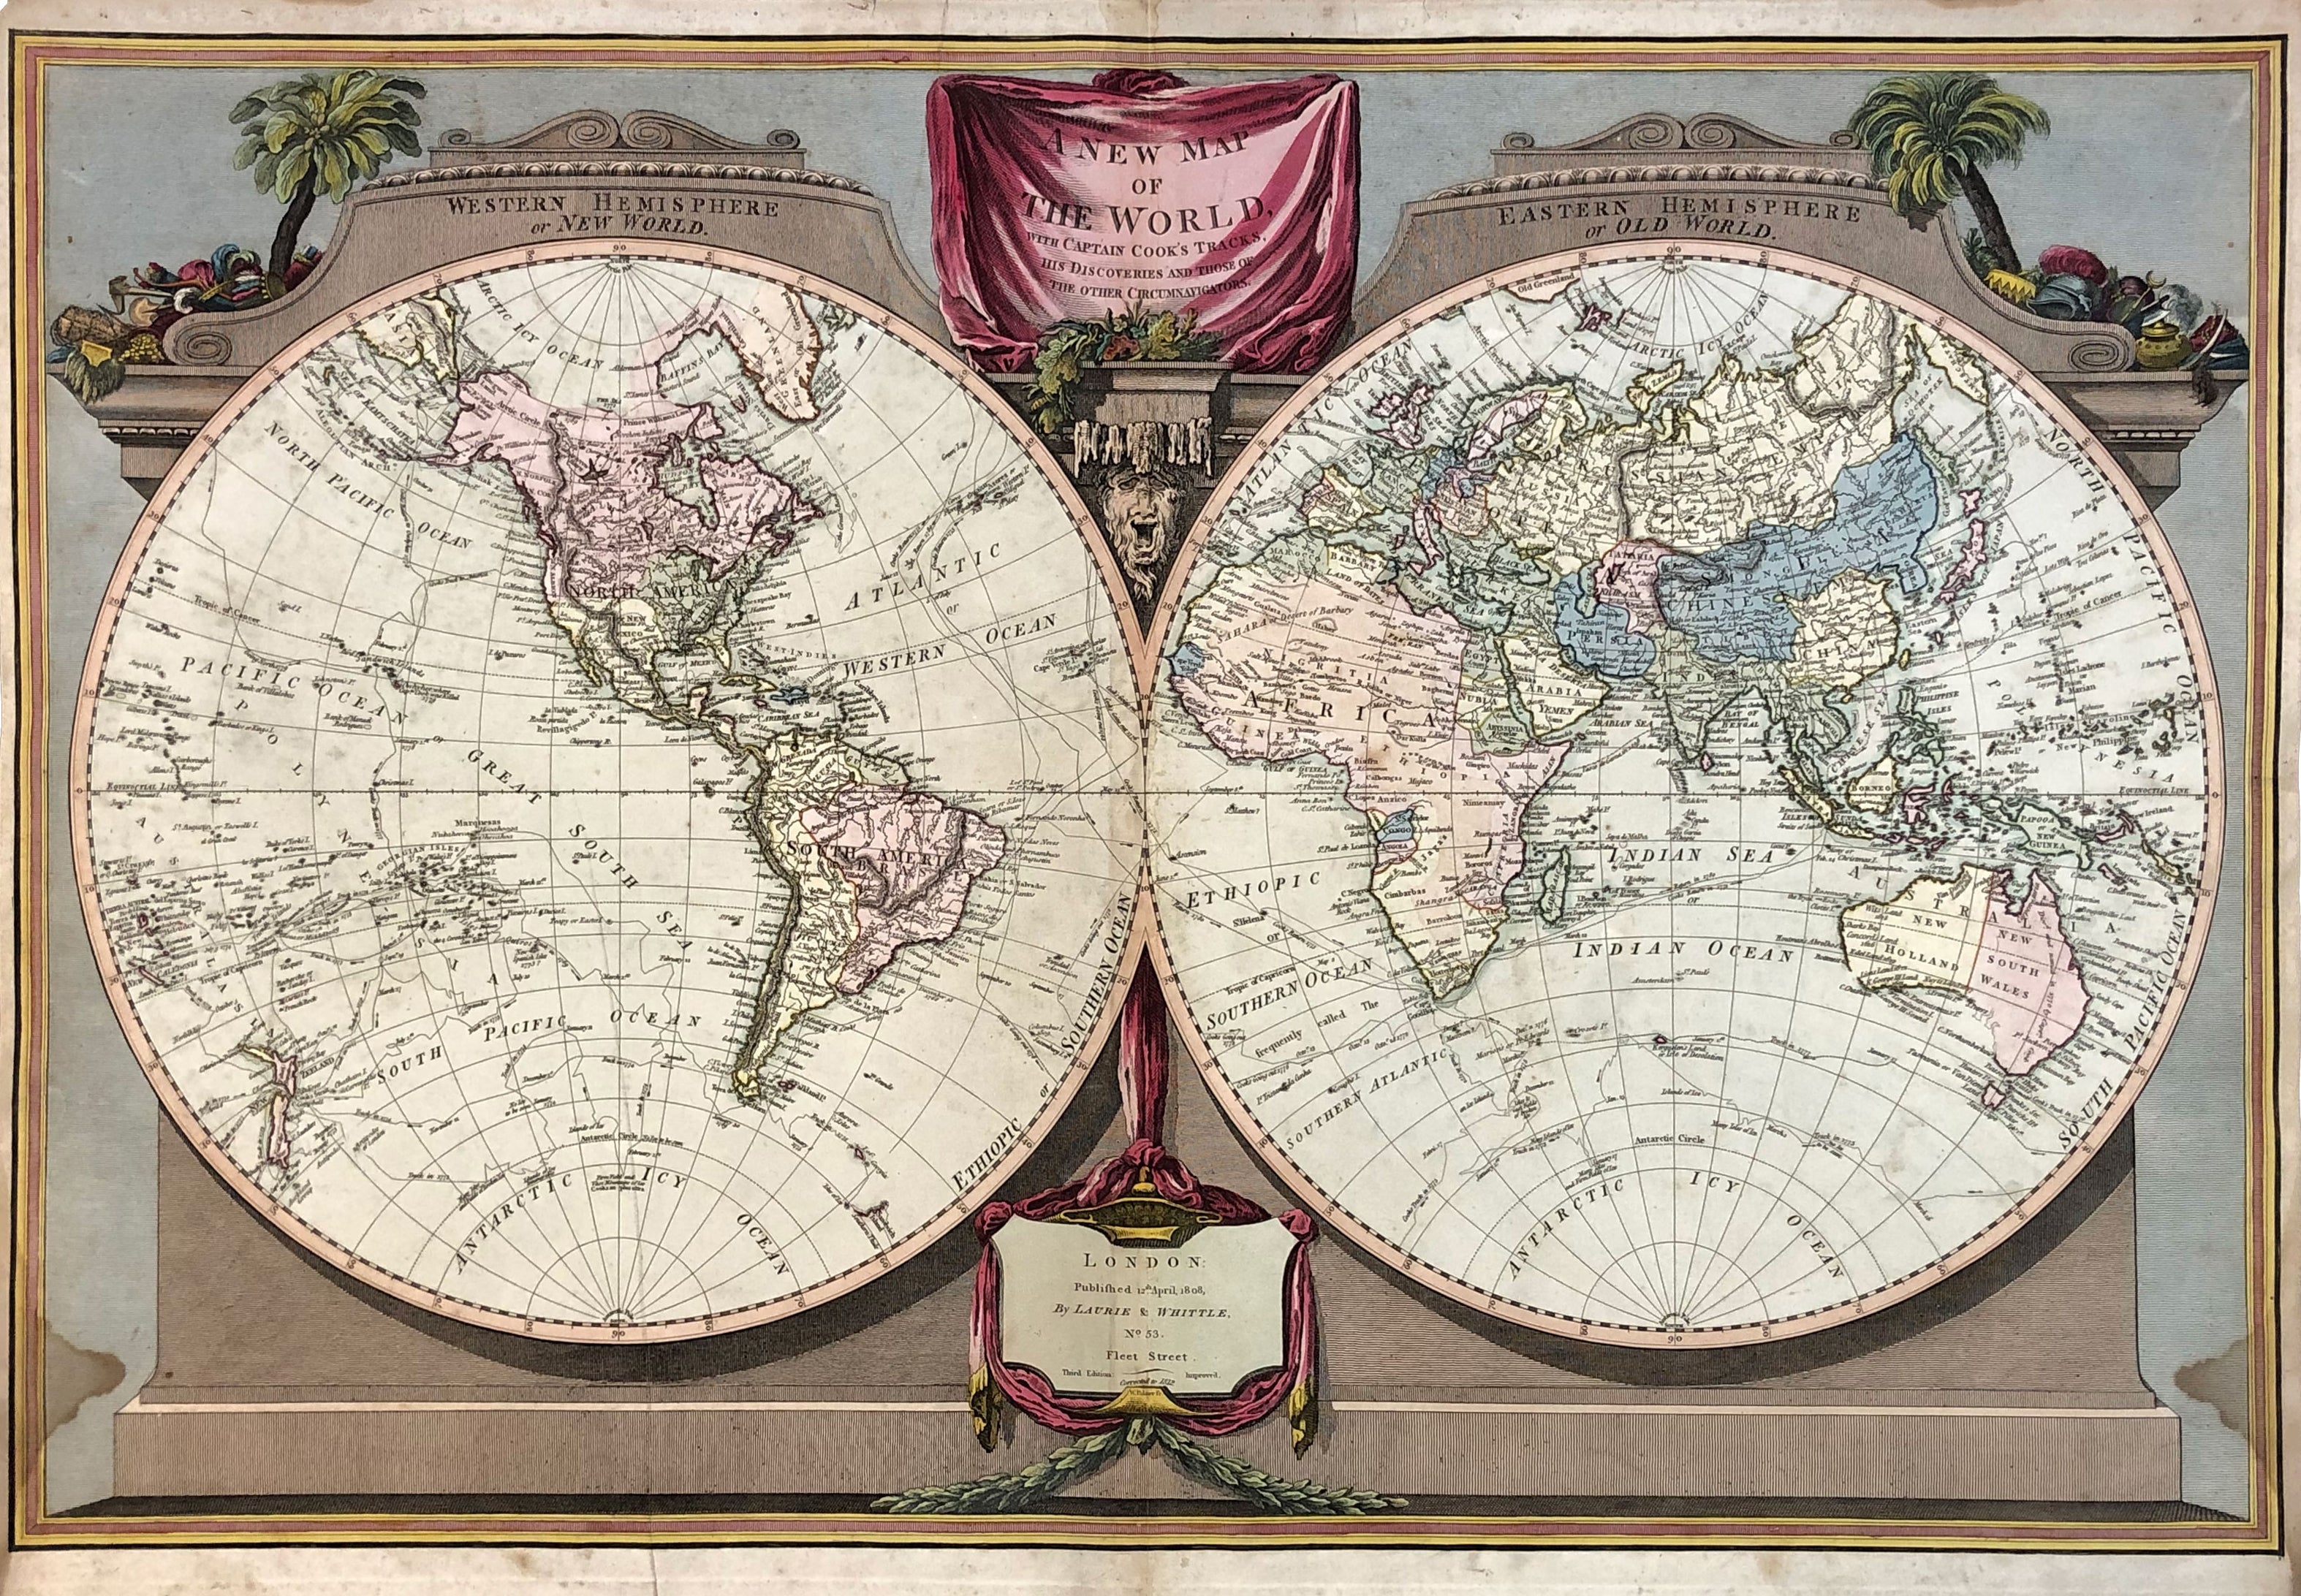 A NEW MAP OF THE WORLD WITH CAPTAIN COOK'S TRACKS, his discoveries and those of the other circumnavigators